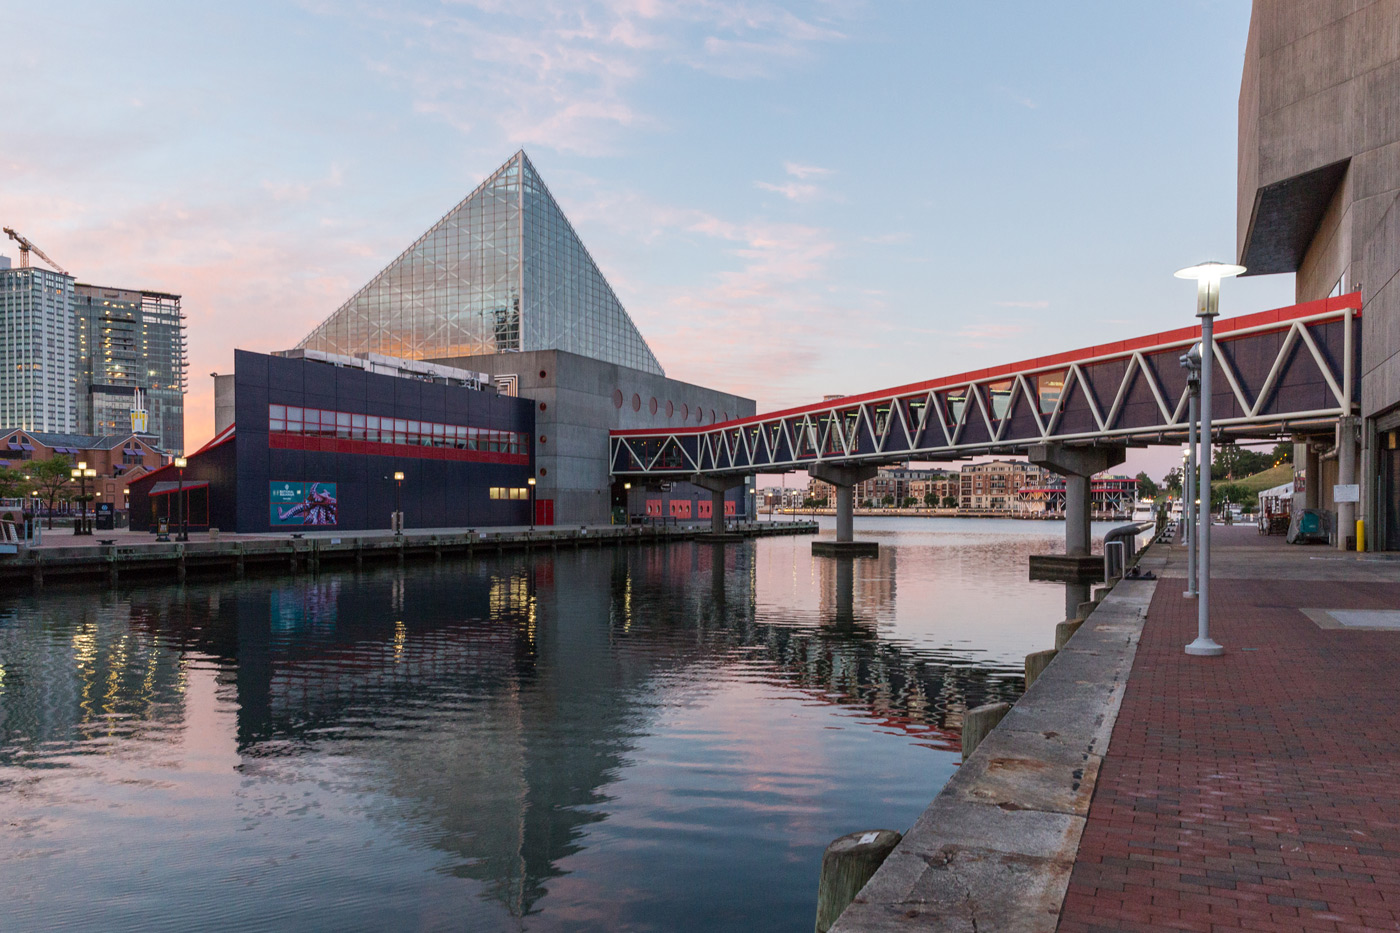 Exterior of the National Aquarium seen by the water.